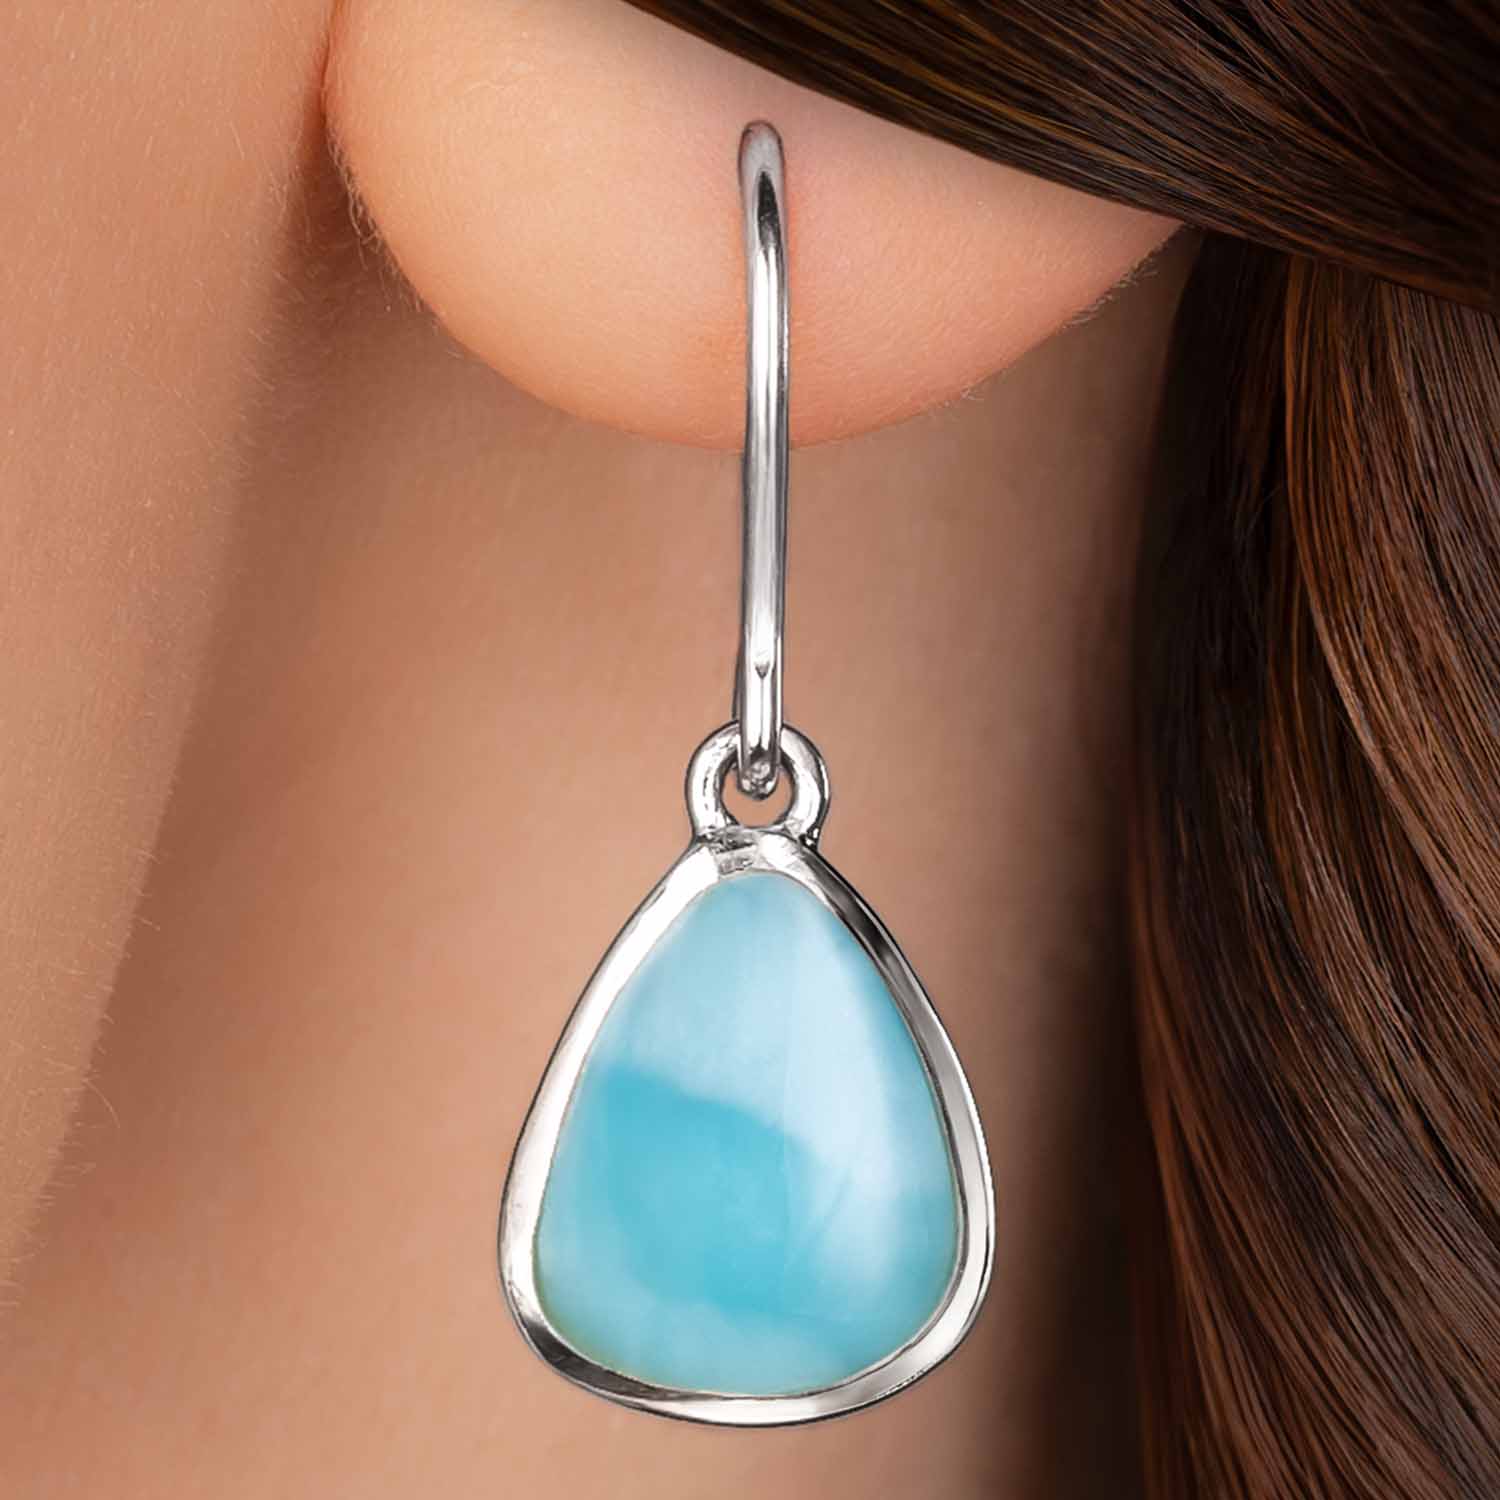 Simple cheyenne Earrings in larimar and silver by marahlago